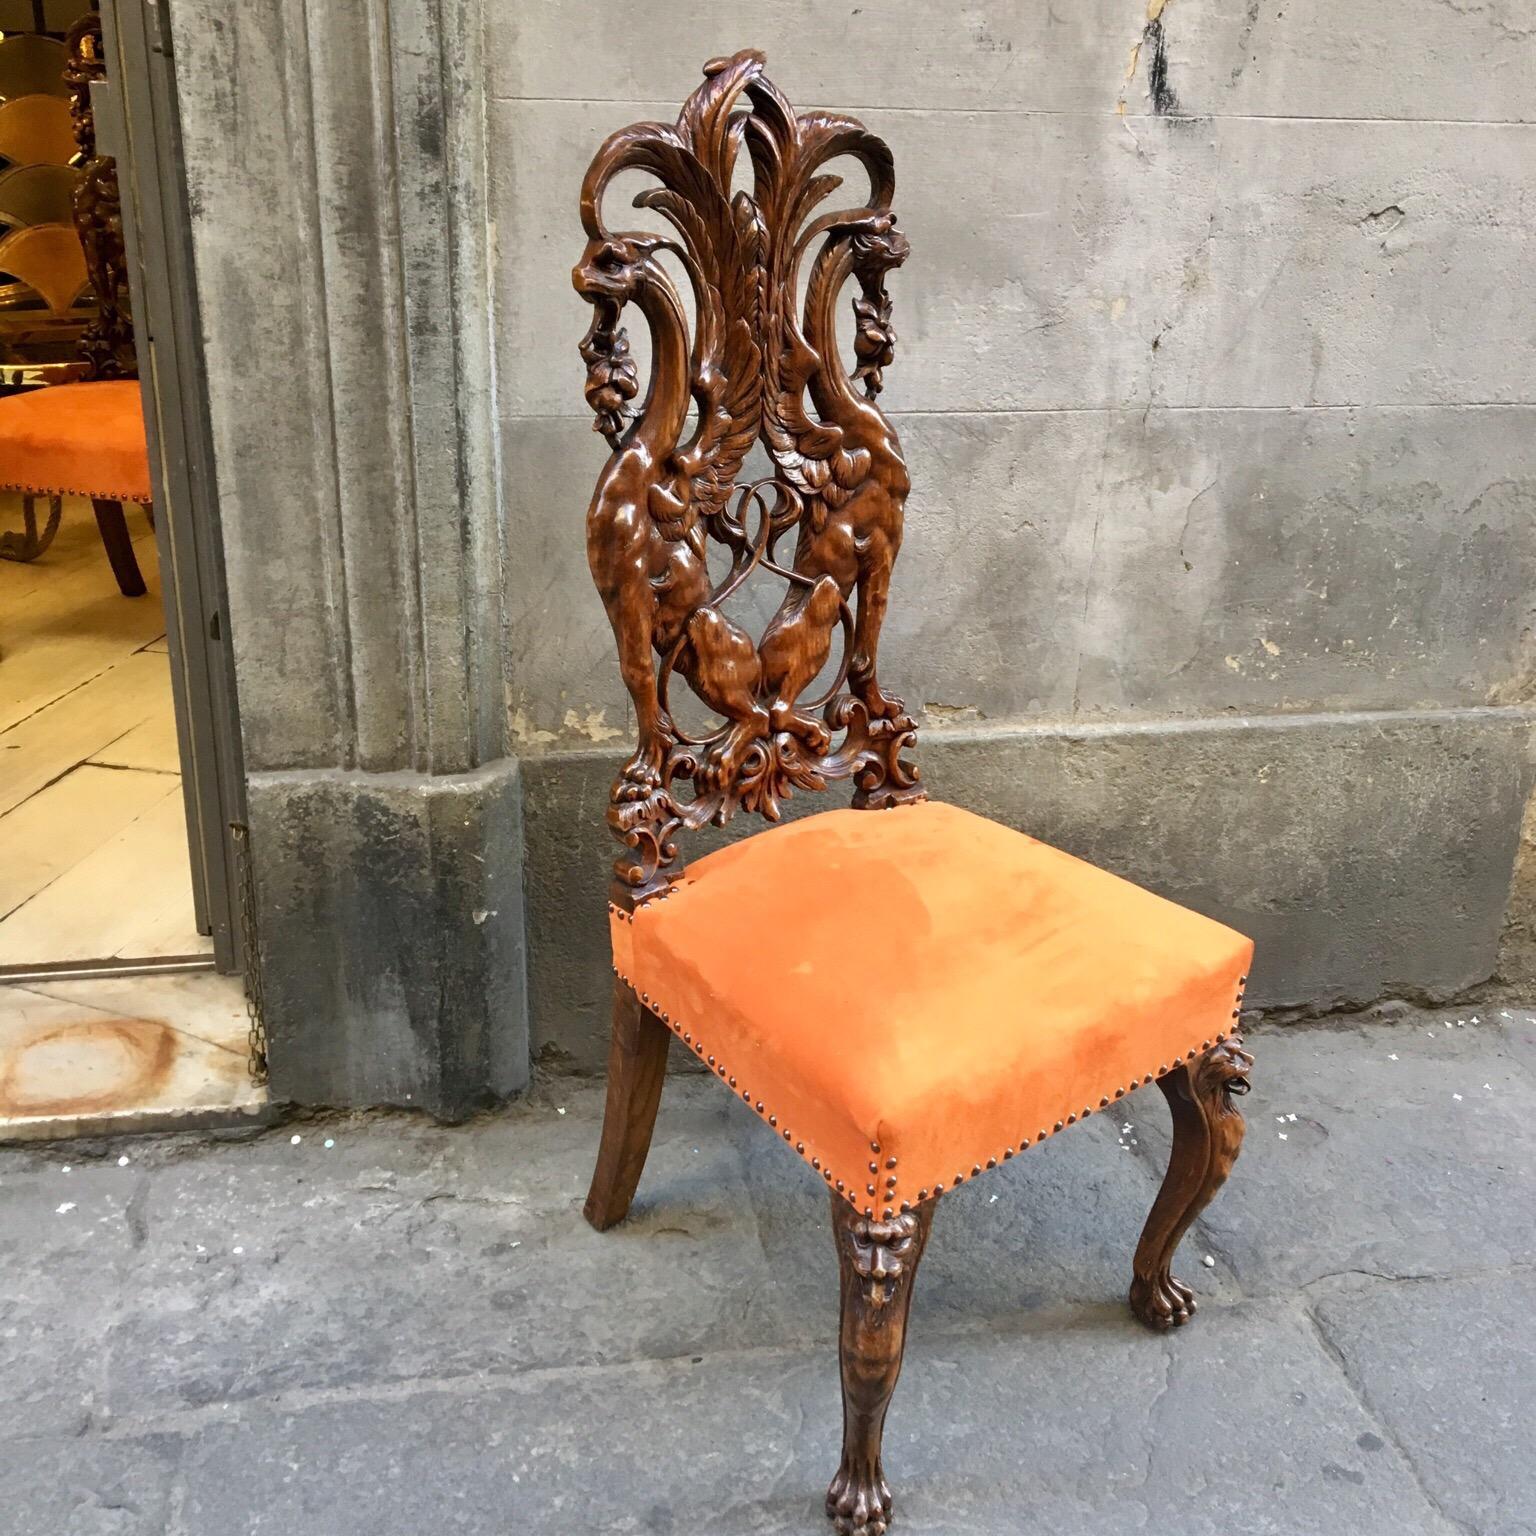 Hand-Carved Pair of Carved Renaissance-Style Wooden Chairs Orange Alcantara Seat, Early 1900